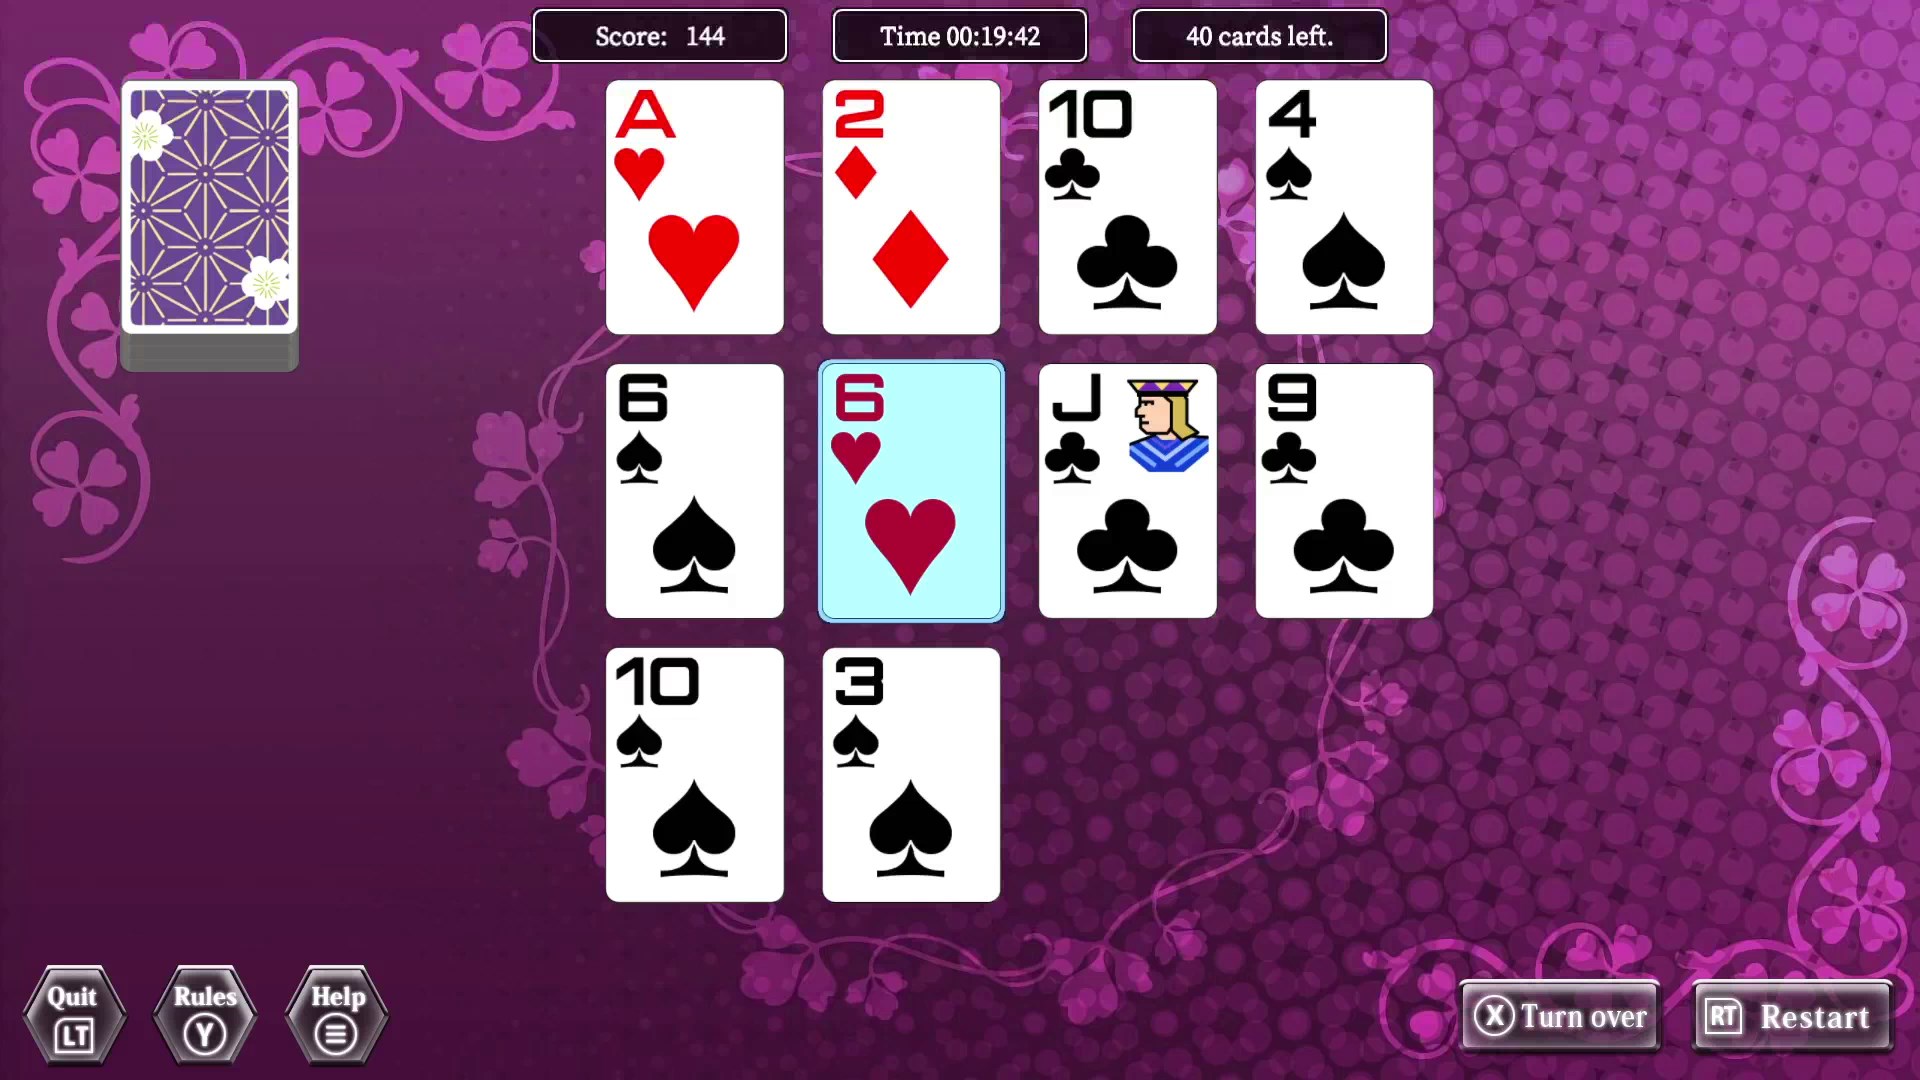 Buy THE CARD Perfect Collection Plus: Texas Hold 'em, Solitaire and others